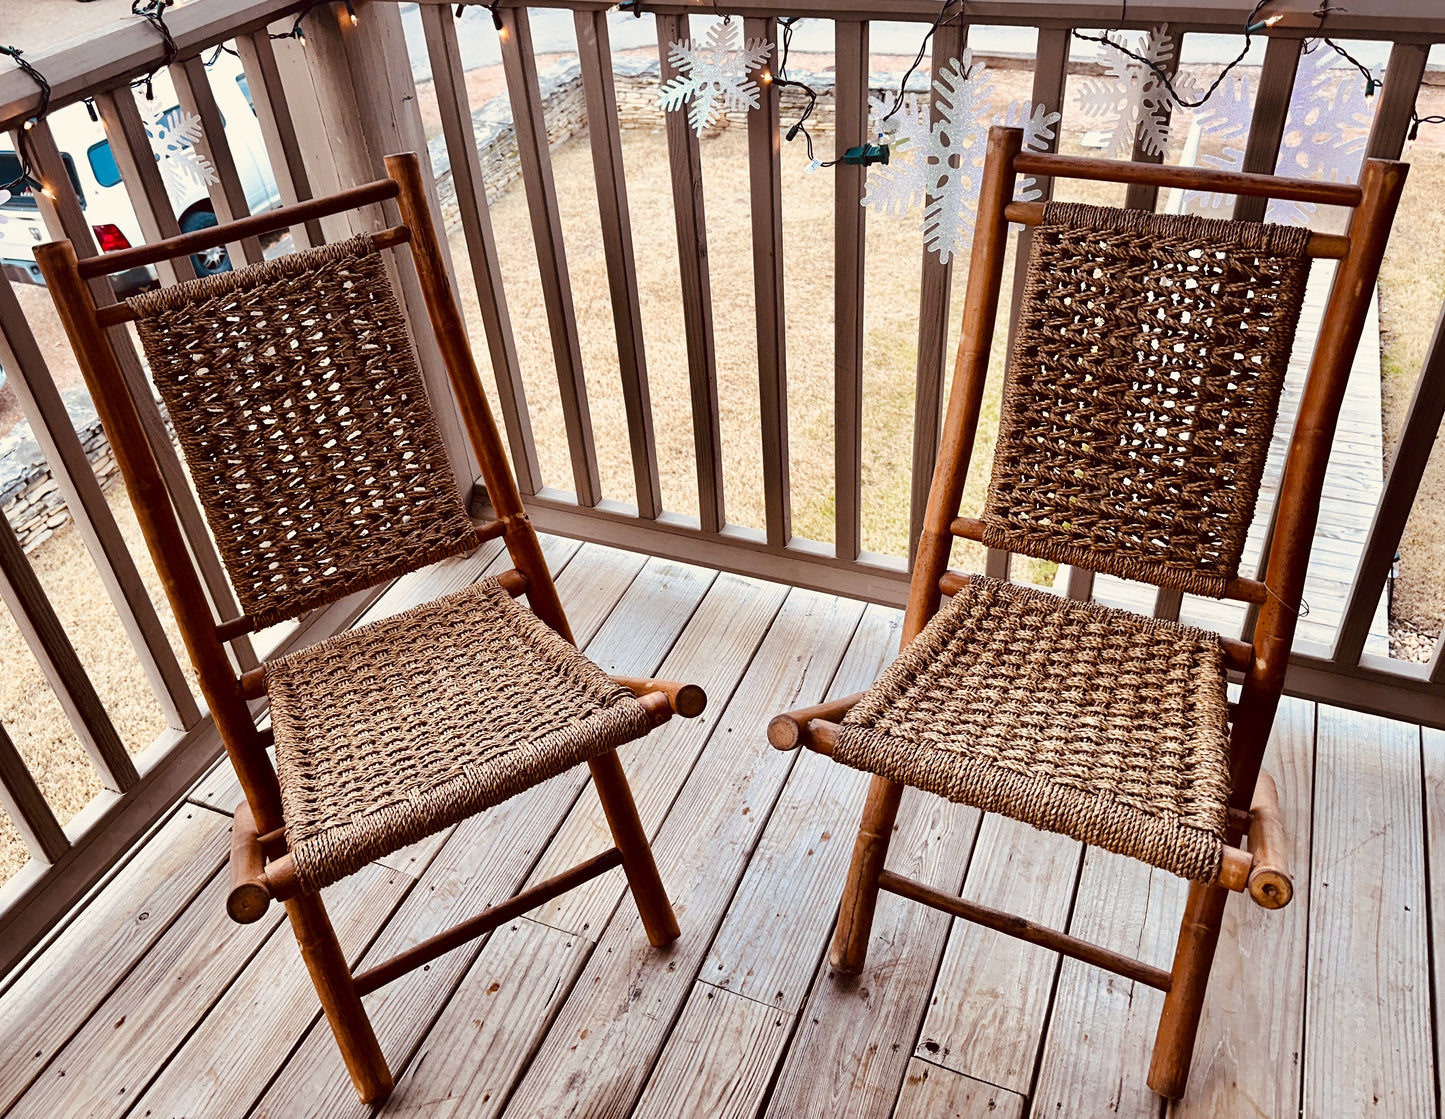 Furniture Vintage Bamboo Wood and Cord Woven Rope Seat Folding Chairs and Matching Table. 1960s